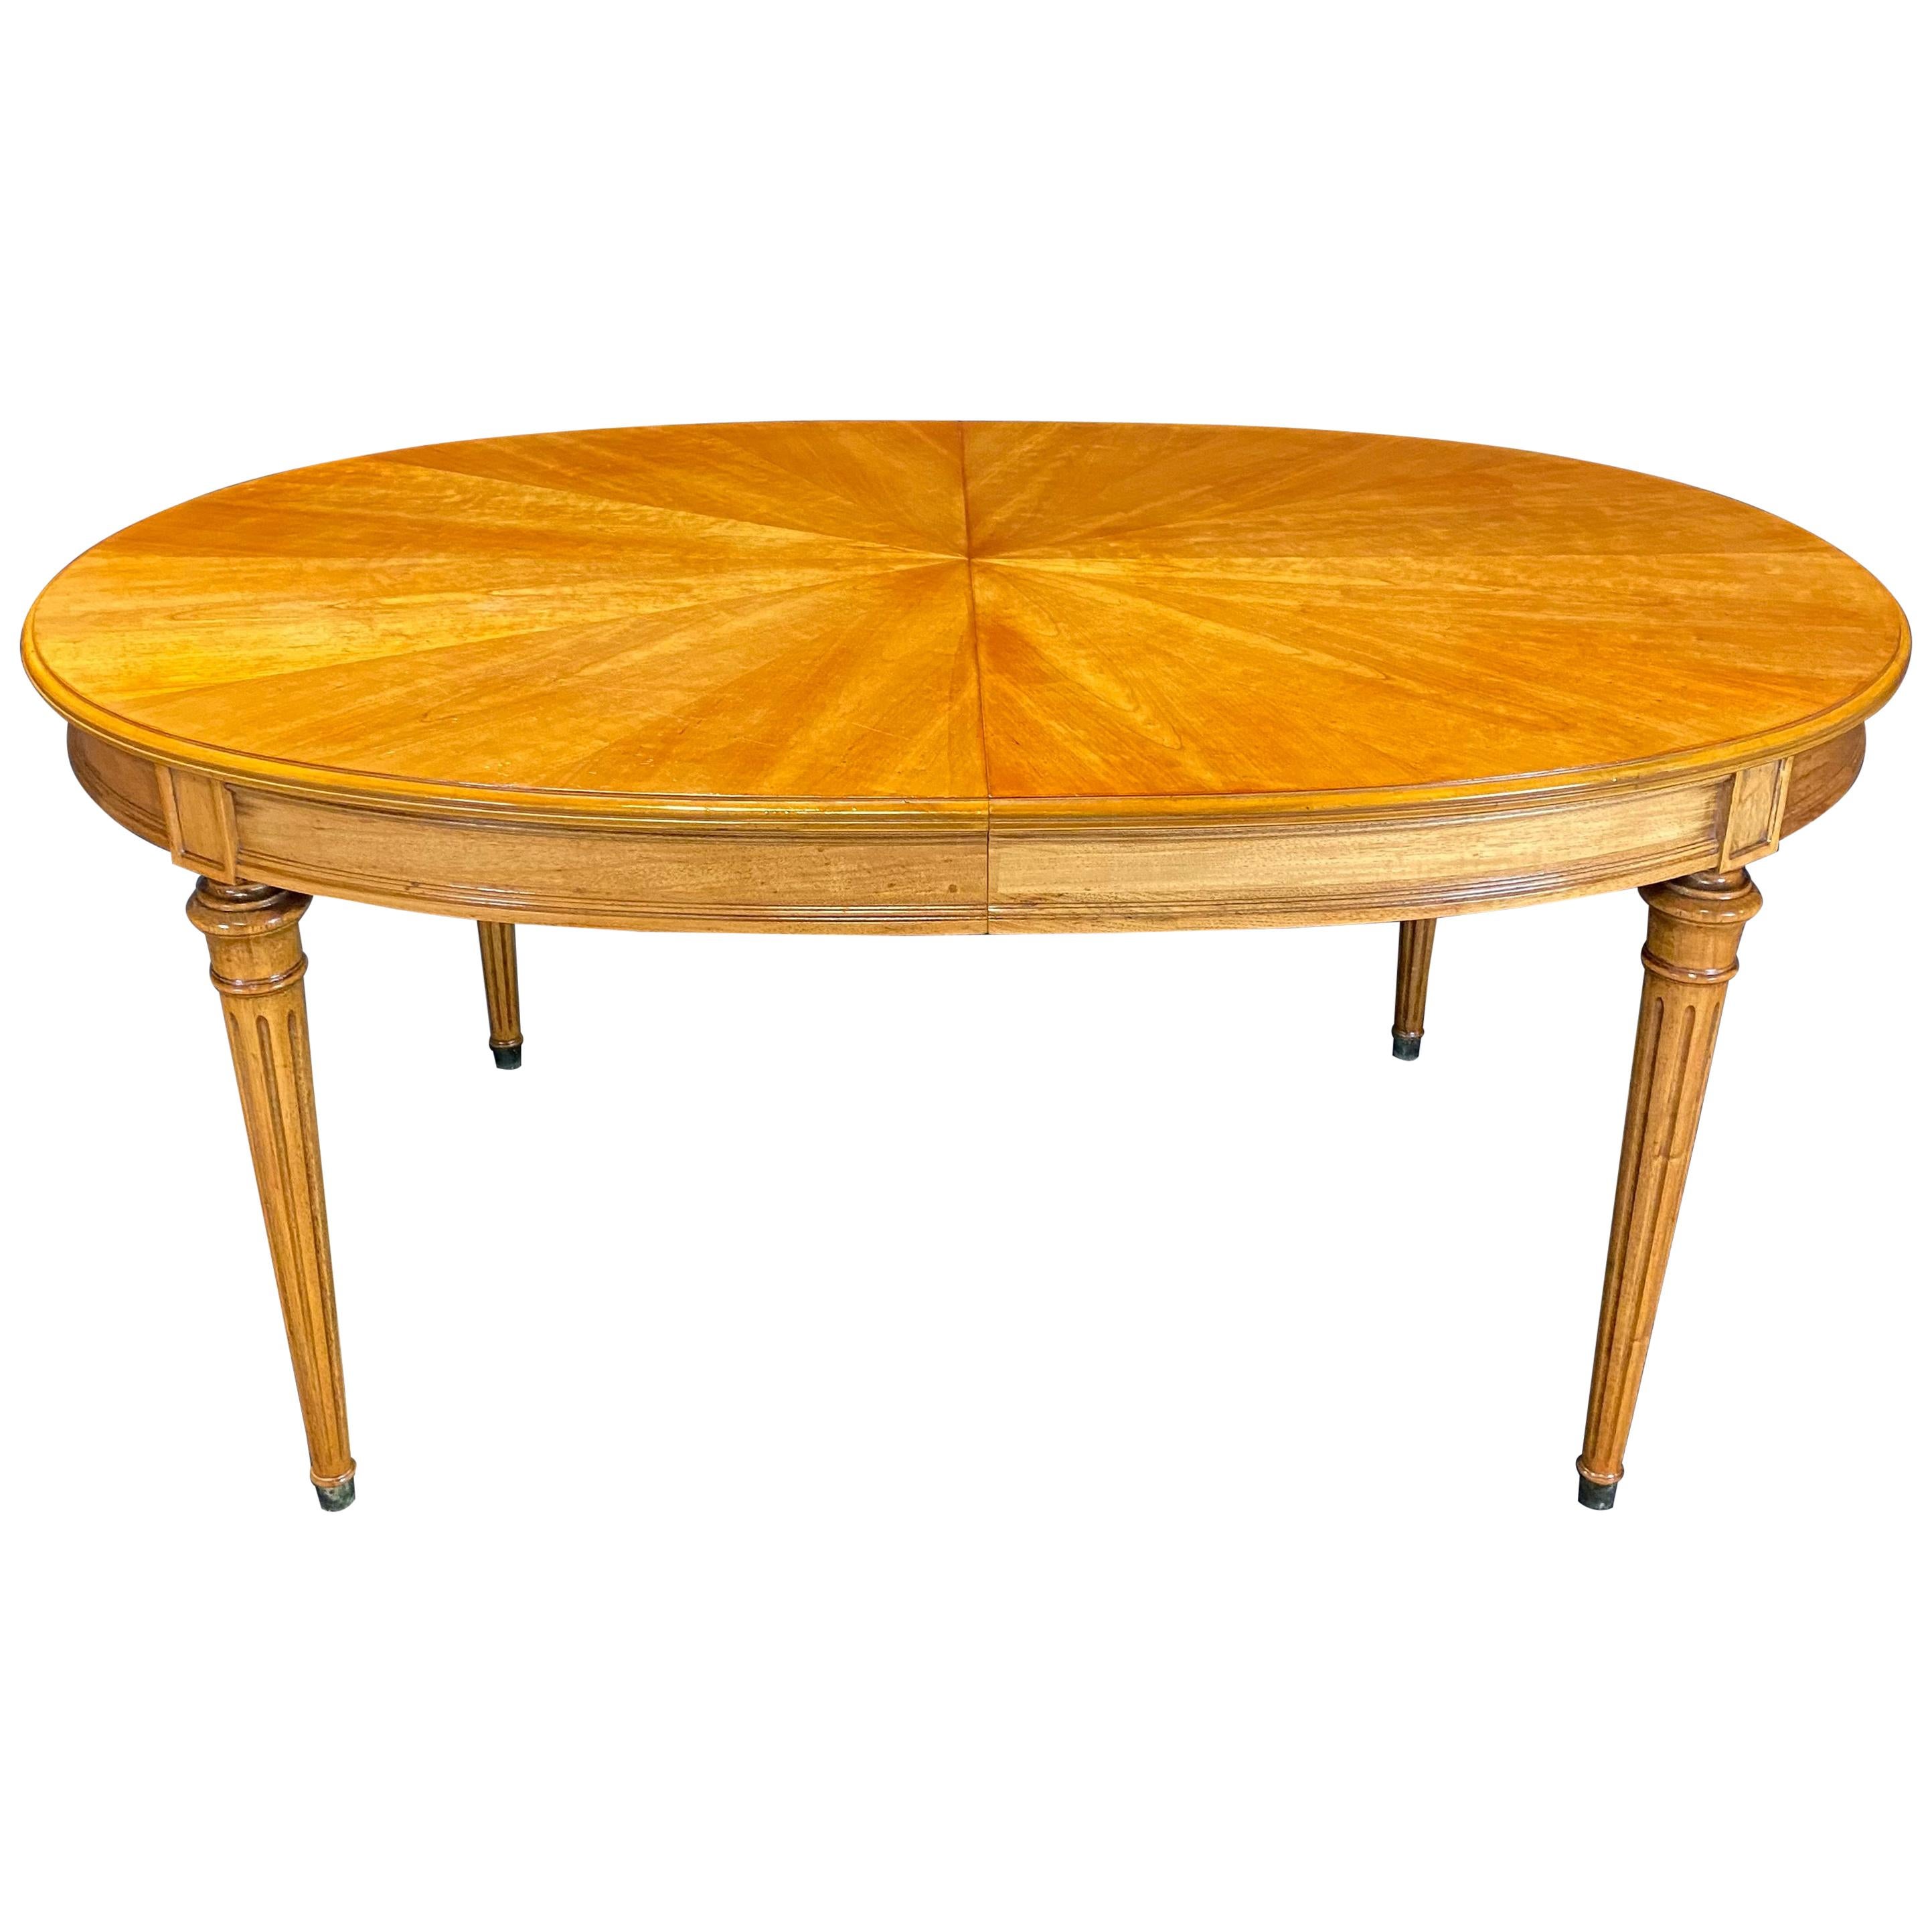 Gorgeous French Louis XVI Style Dining Table with Sunburst Top and Leaves